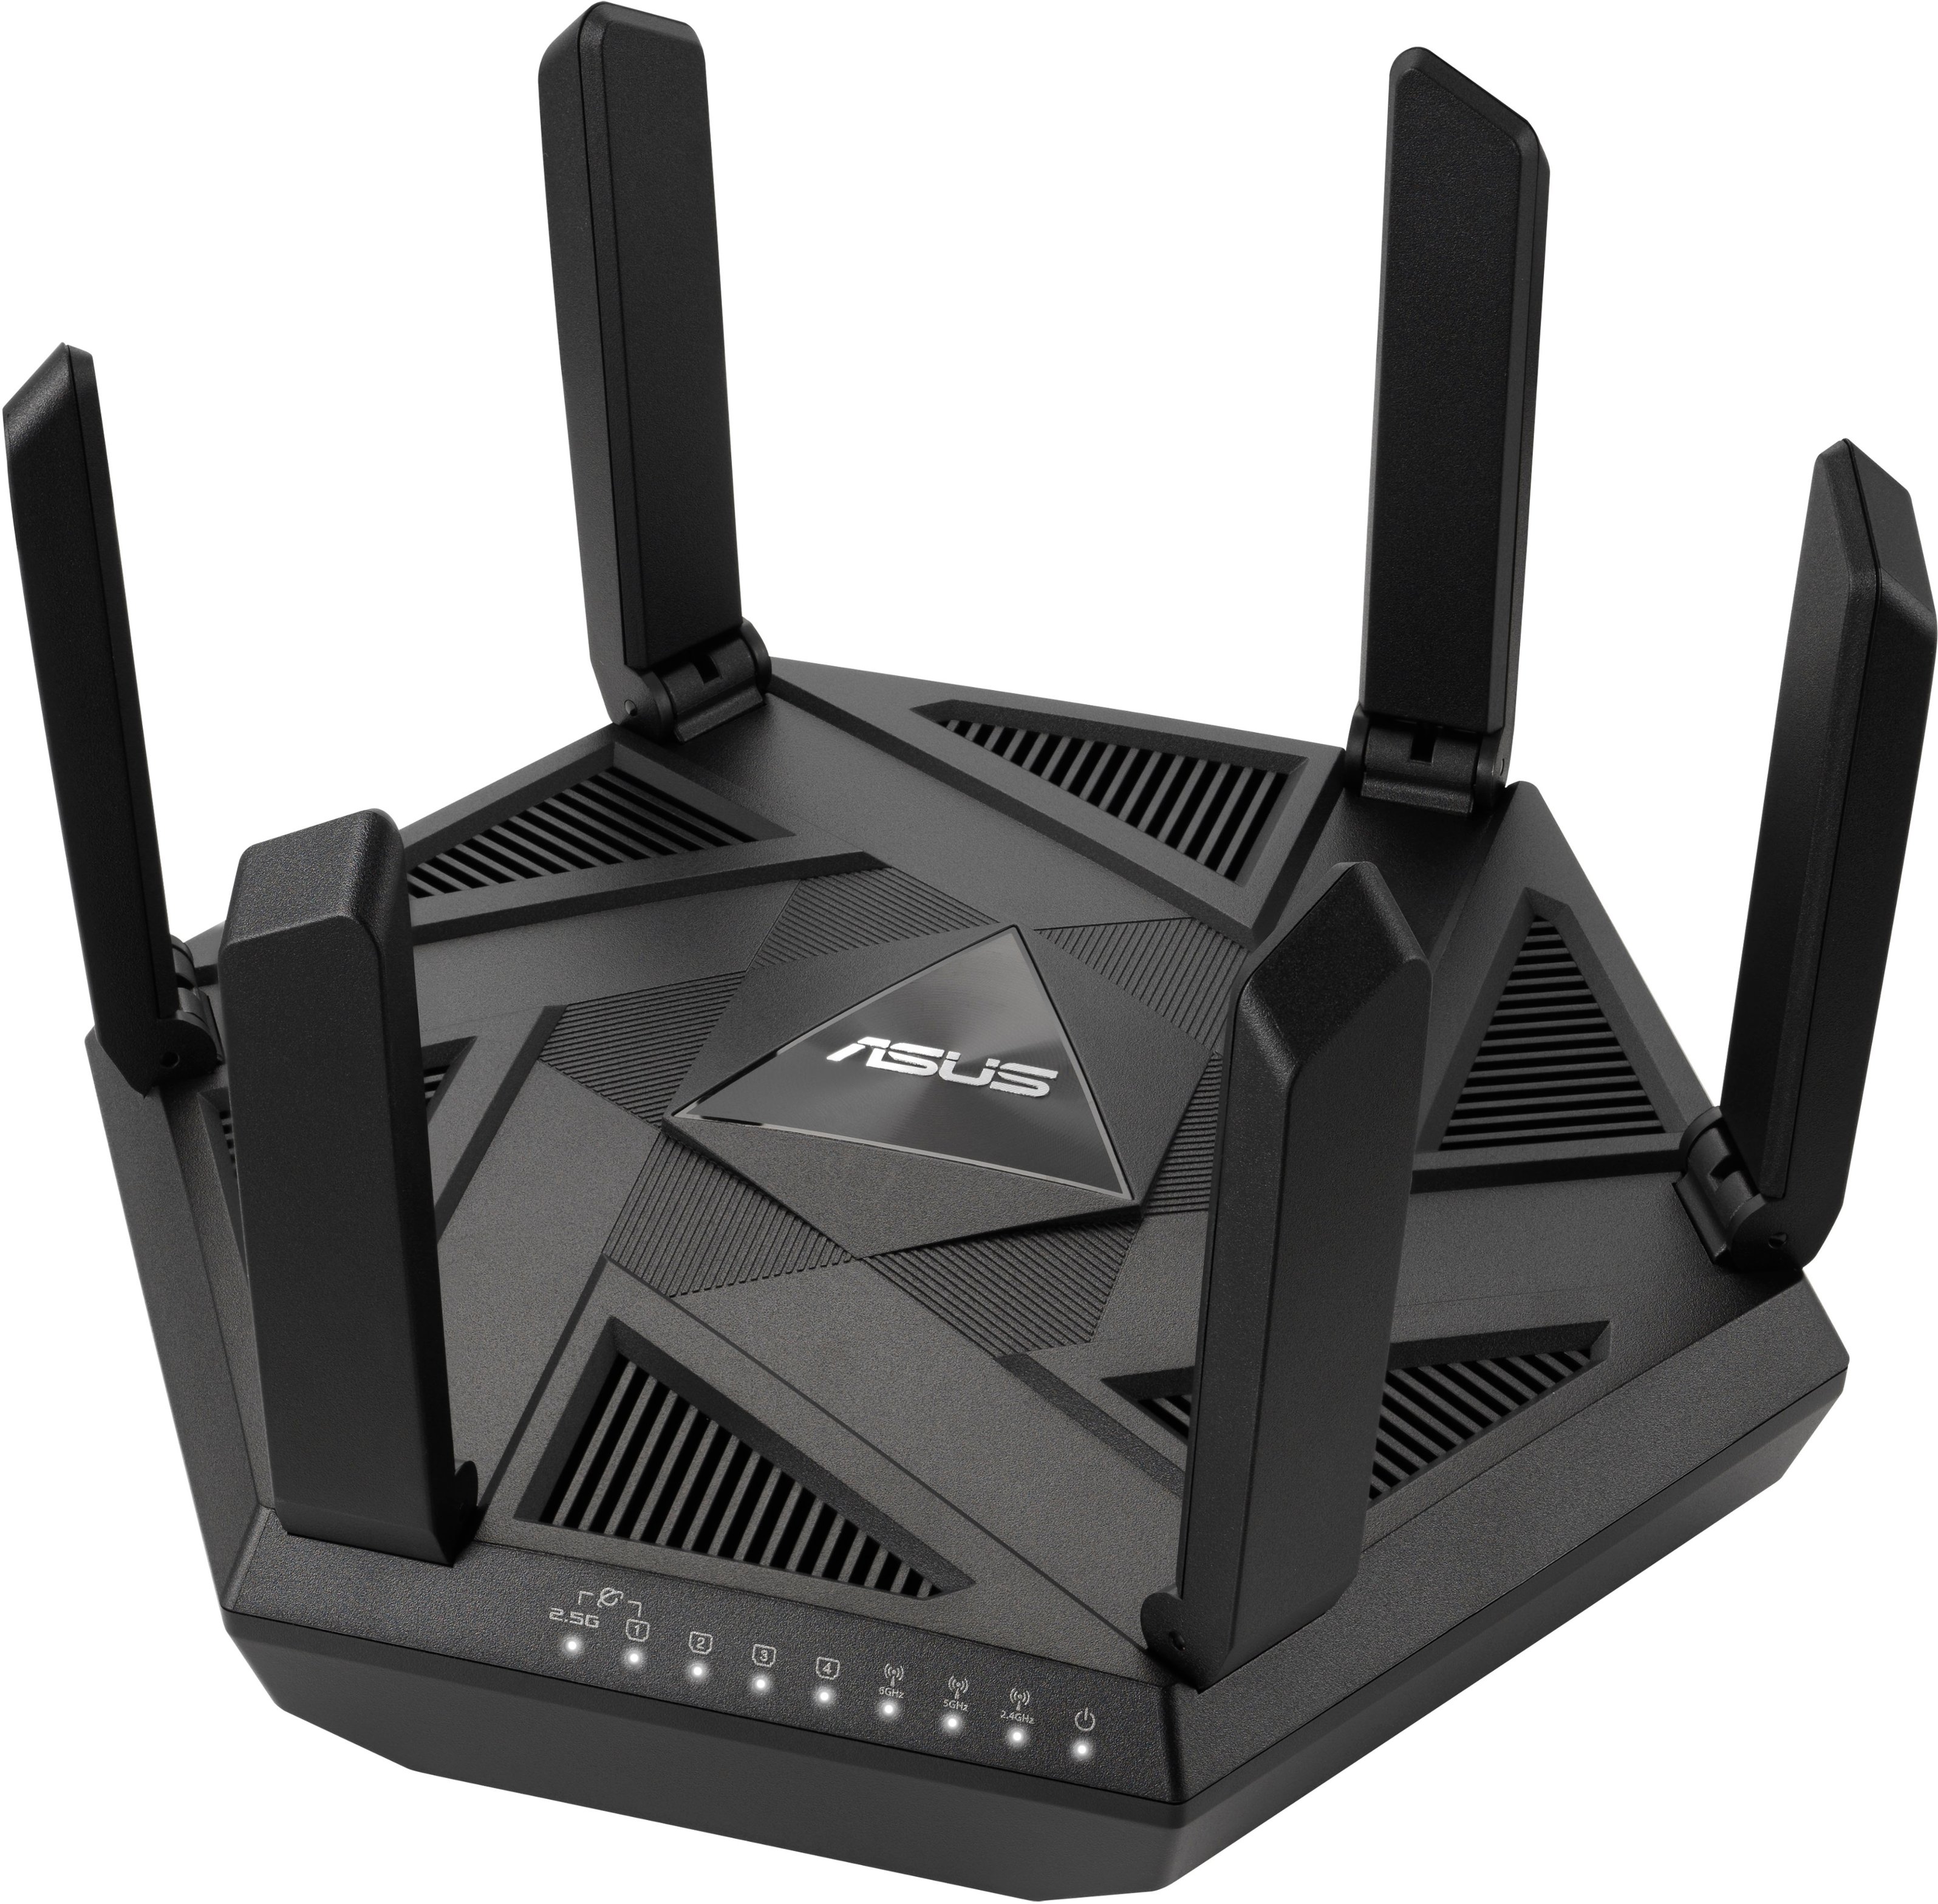 Angle View: ASUS - RT AXE7800 Tri-Band Wi-Fi Router - Black